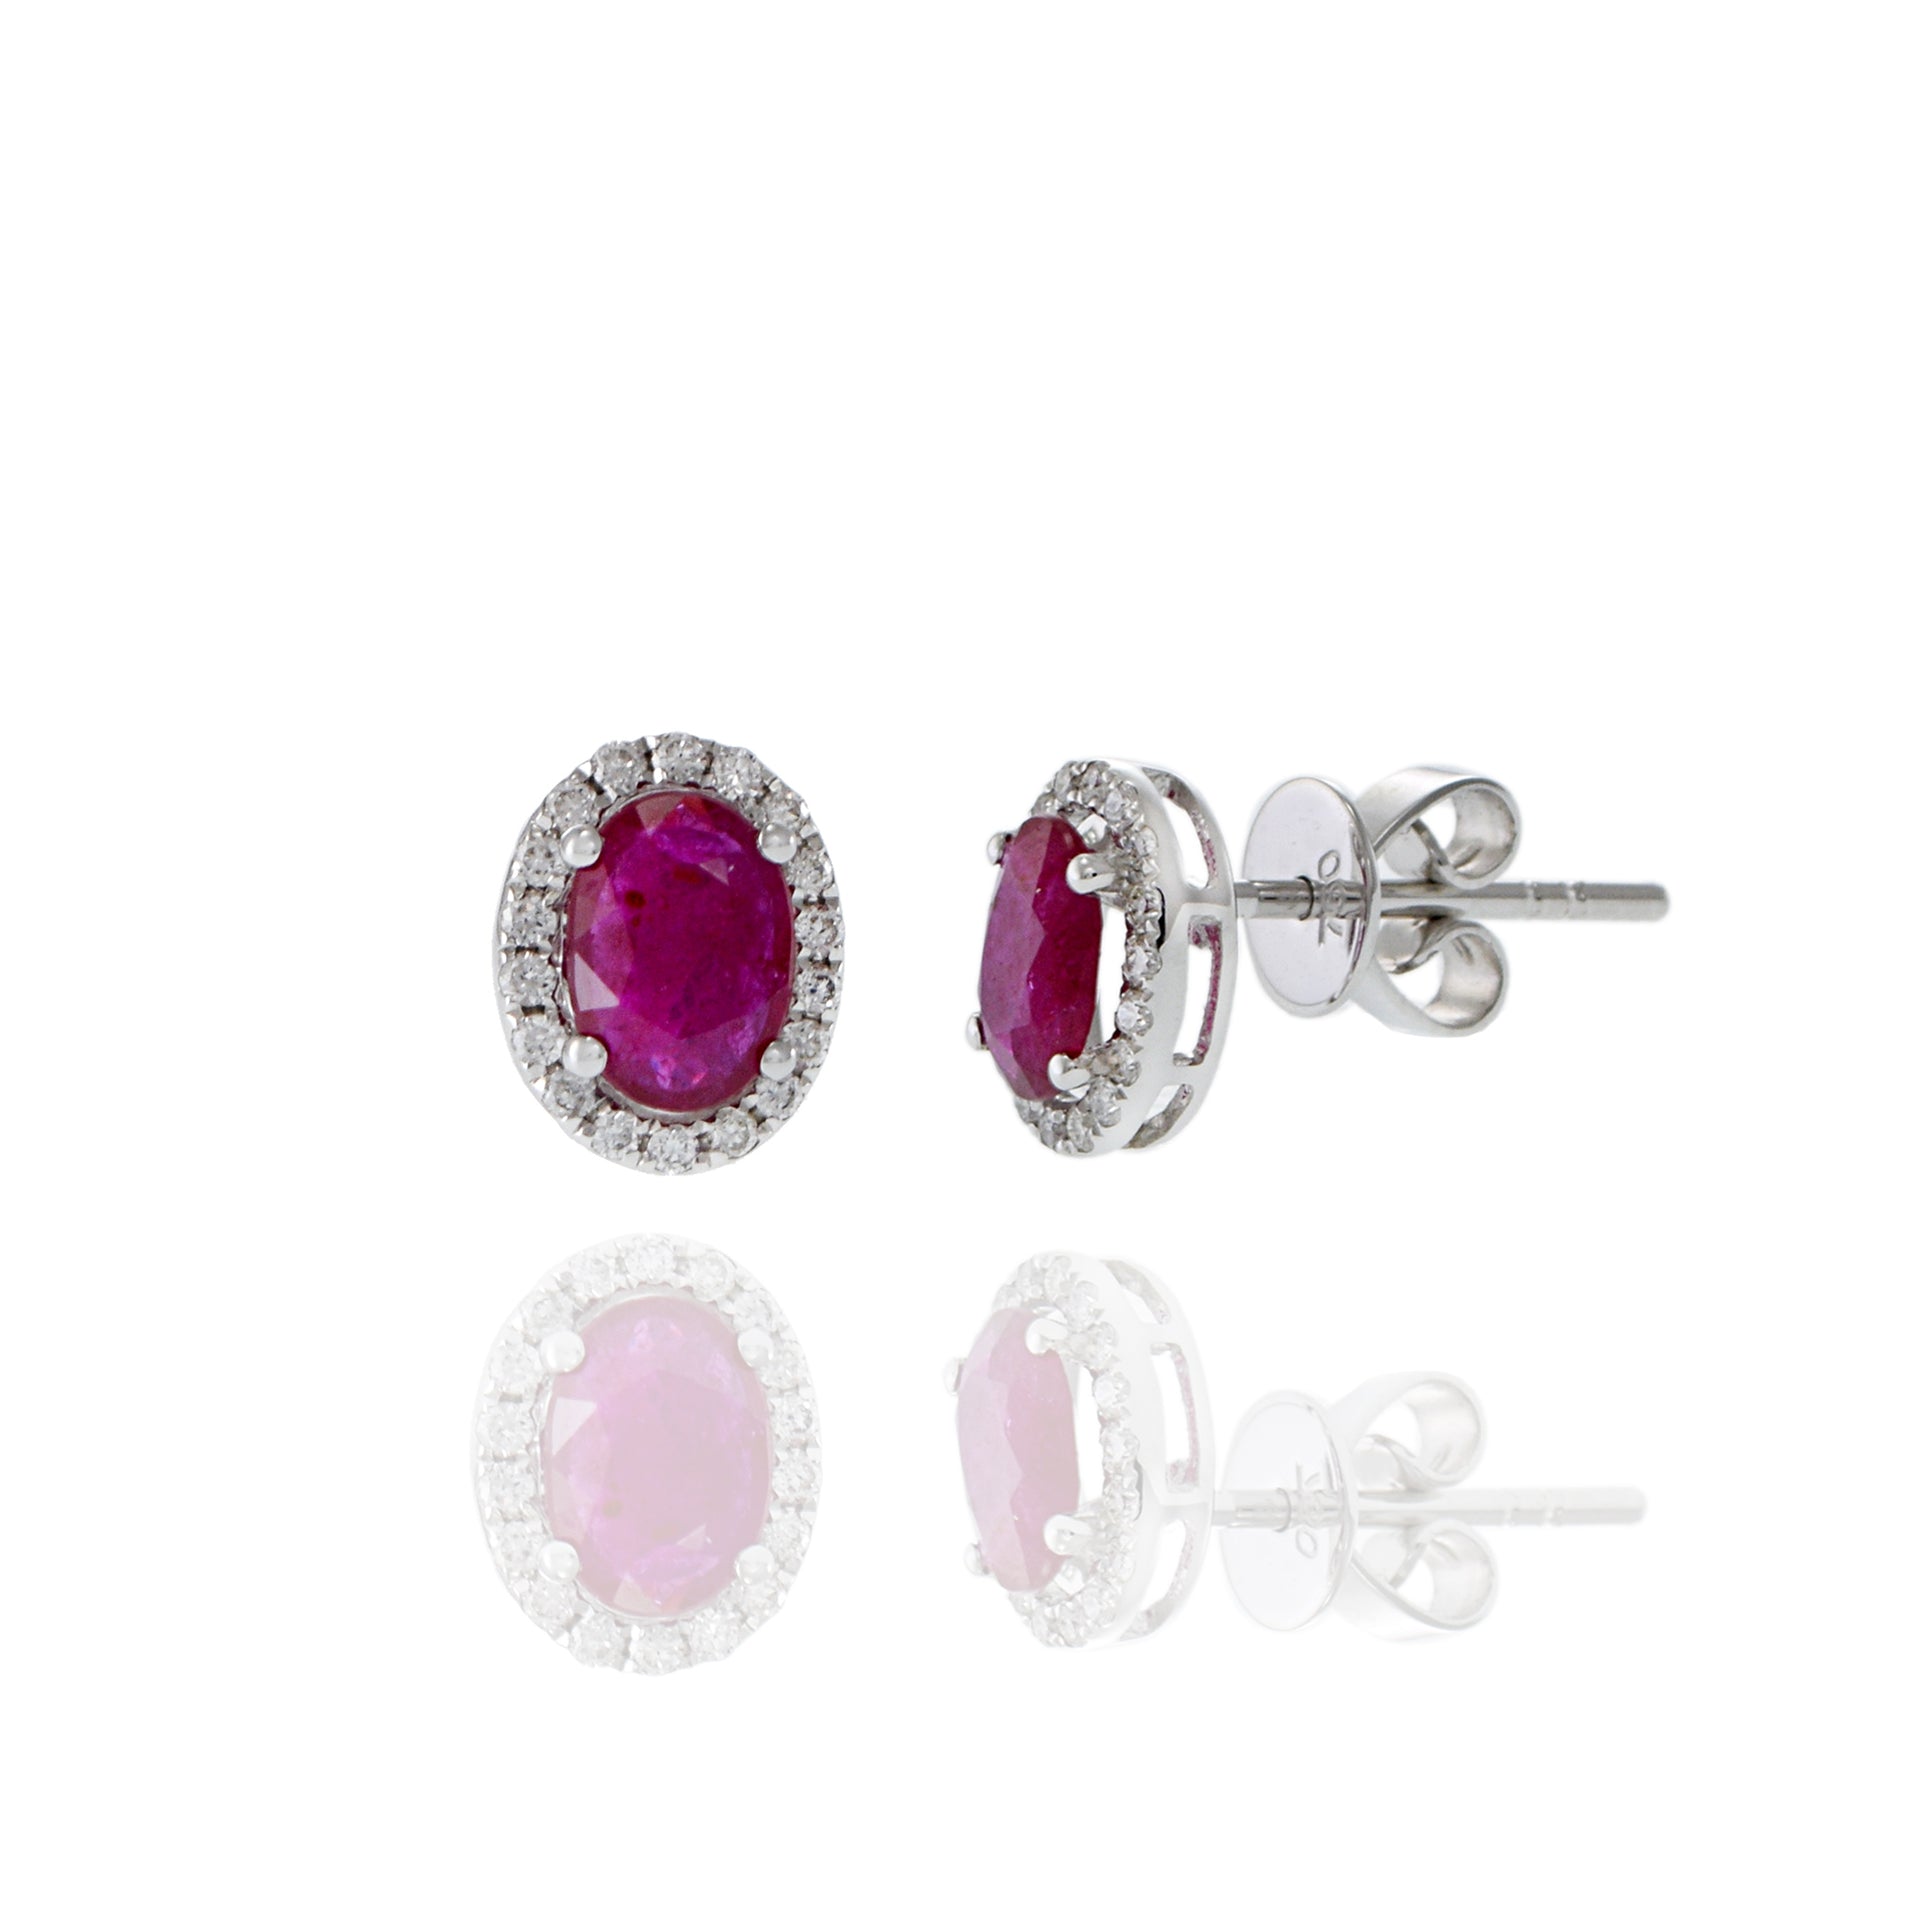 18KT White Gold Ruby And Diamond Earrings